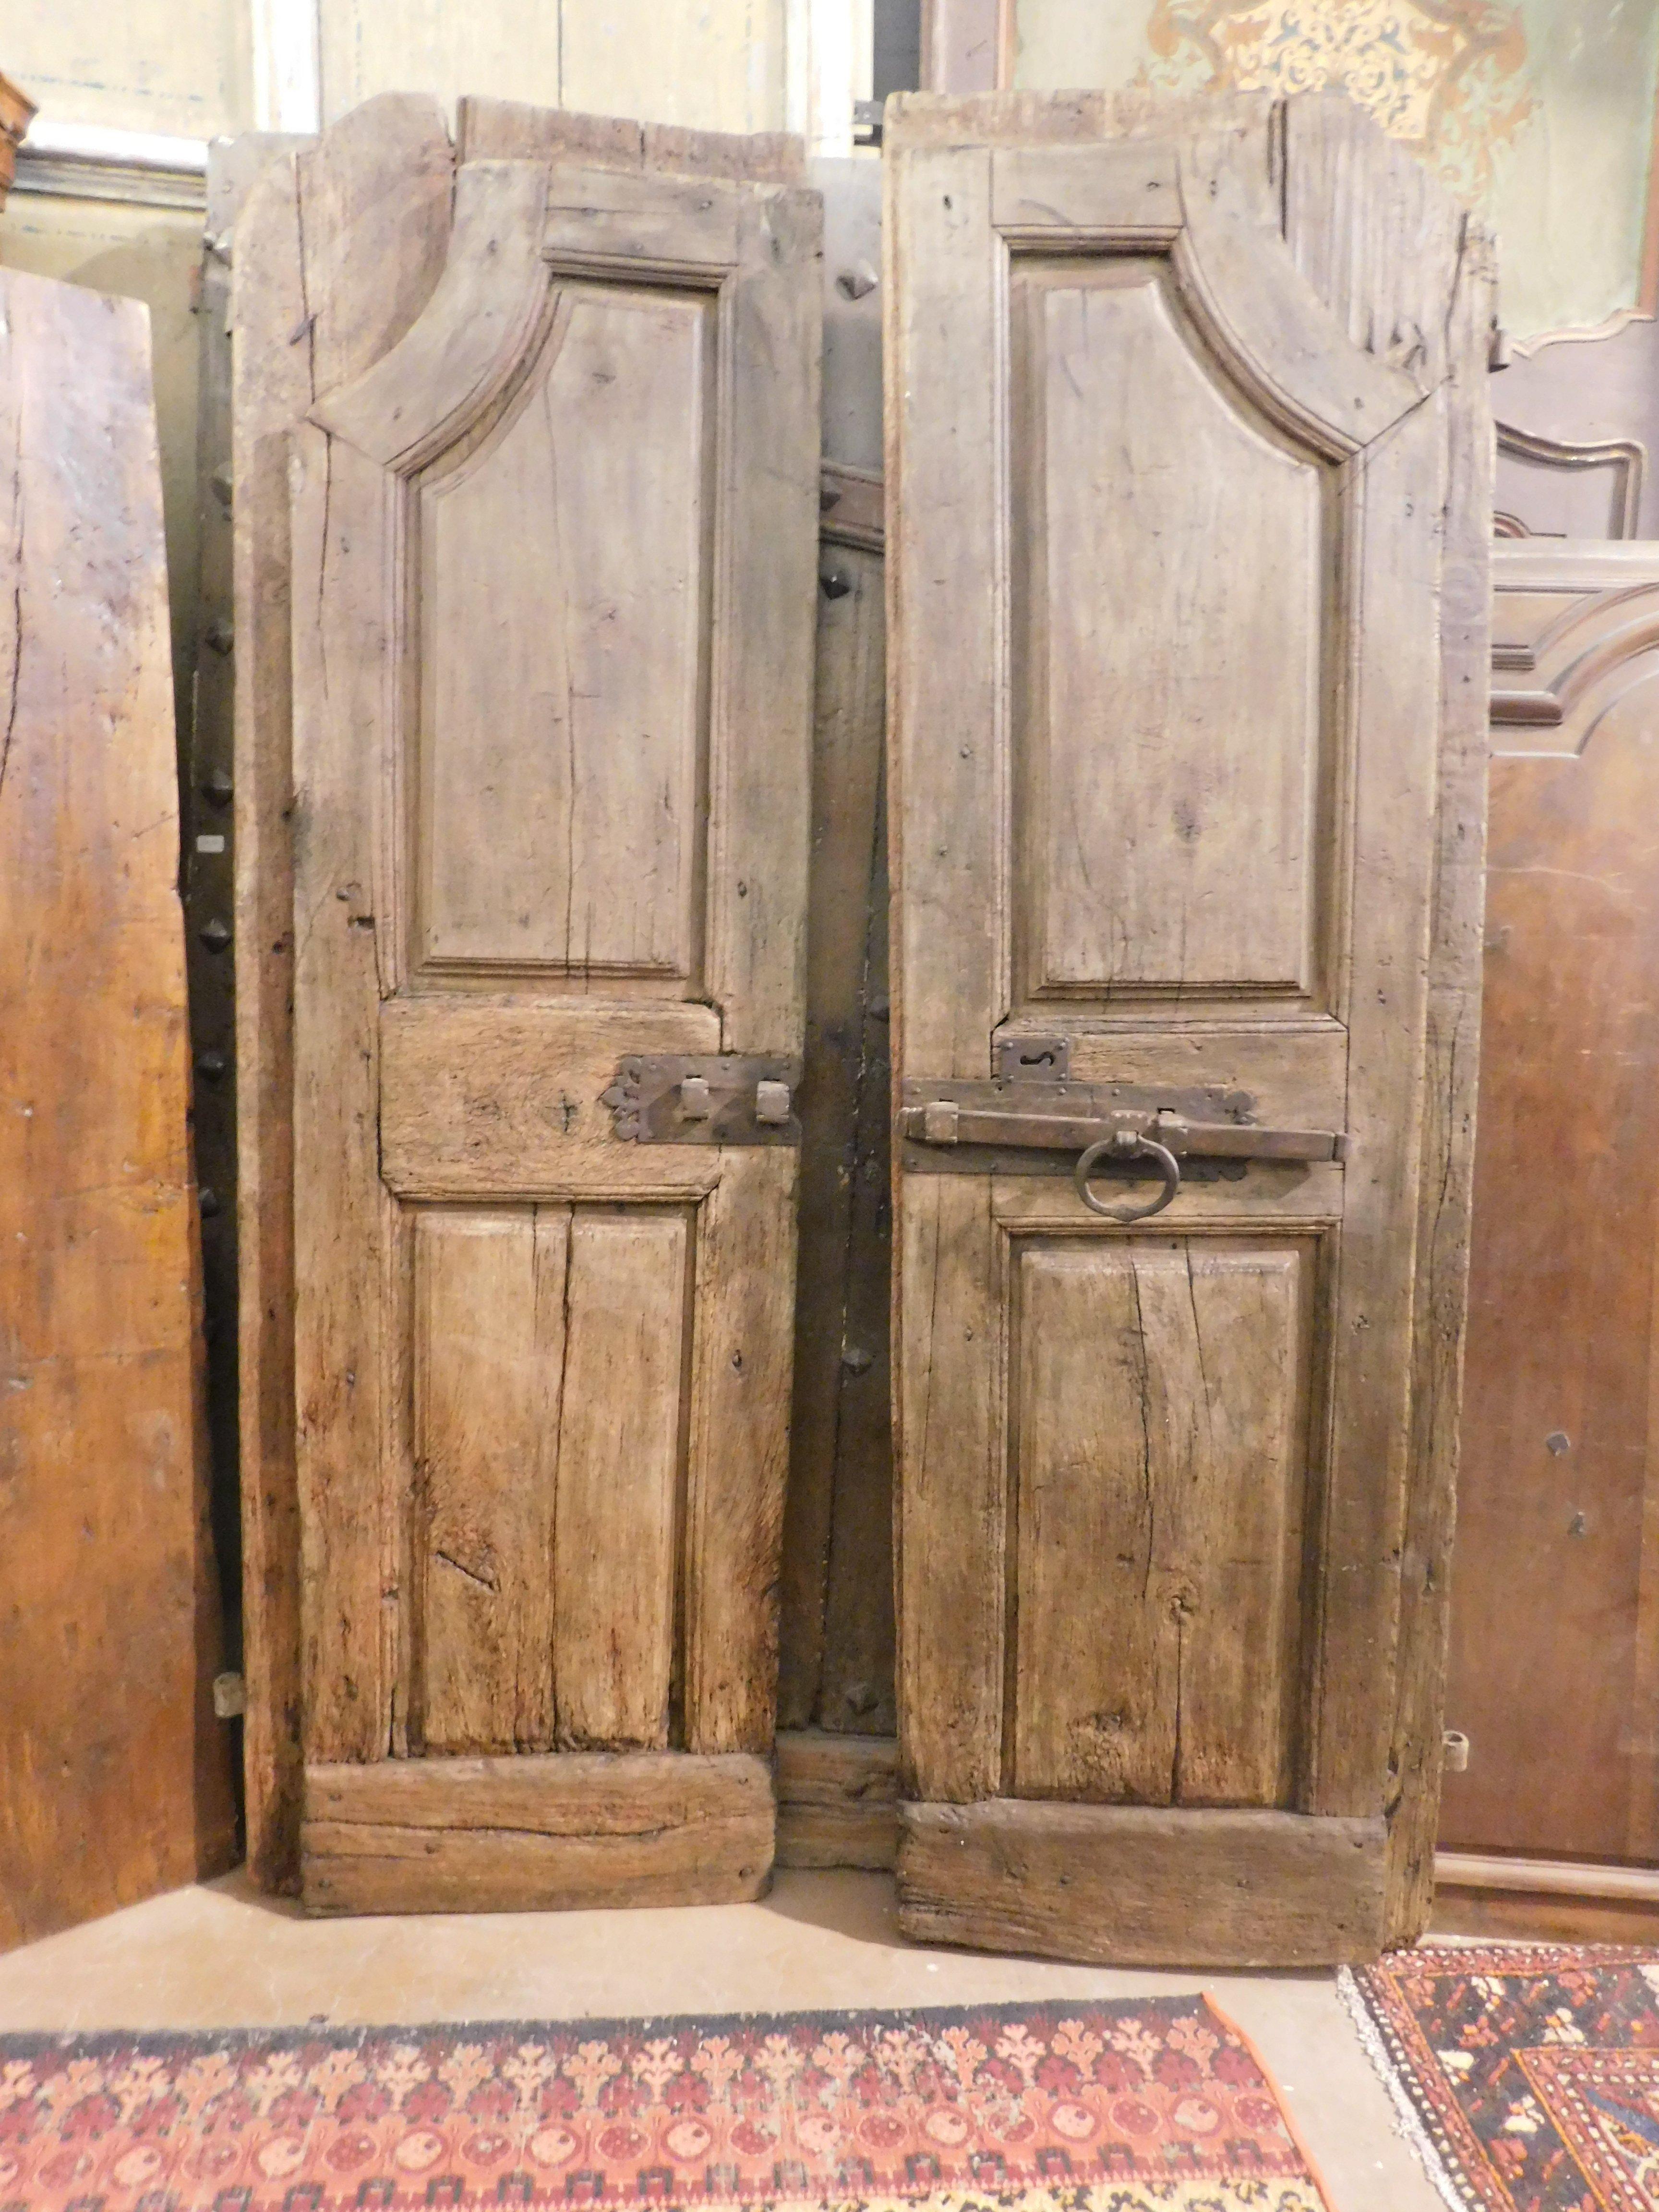 Ancient arched door in solid walnut, hand-carved with arched shape and molared panels, built in the 18th century for a house in northern Italy (Piedmont), has a wide ledge as it opened by pushing and still retains its original ironwork. beautiful